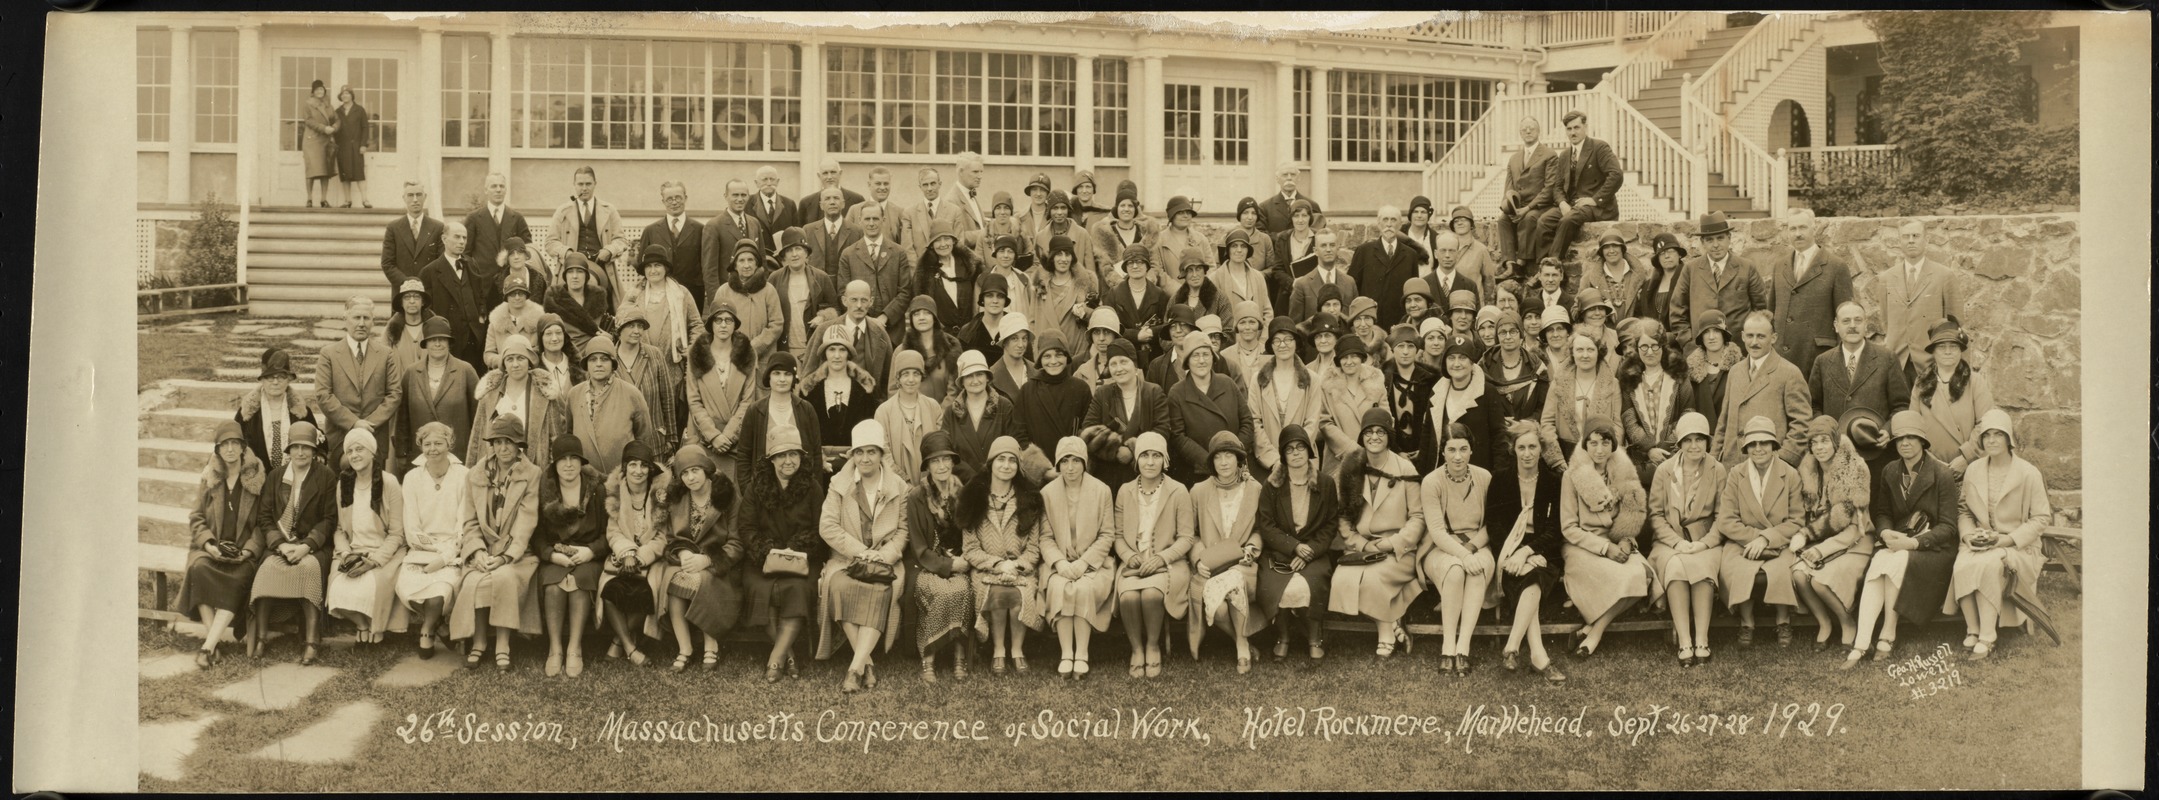 Massachusetts Conference of Social Work, Marblehead, MA